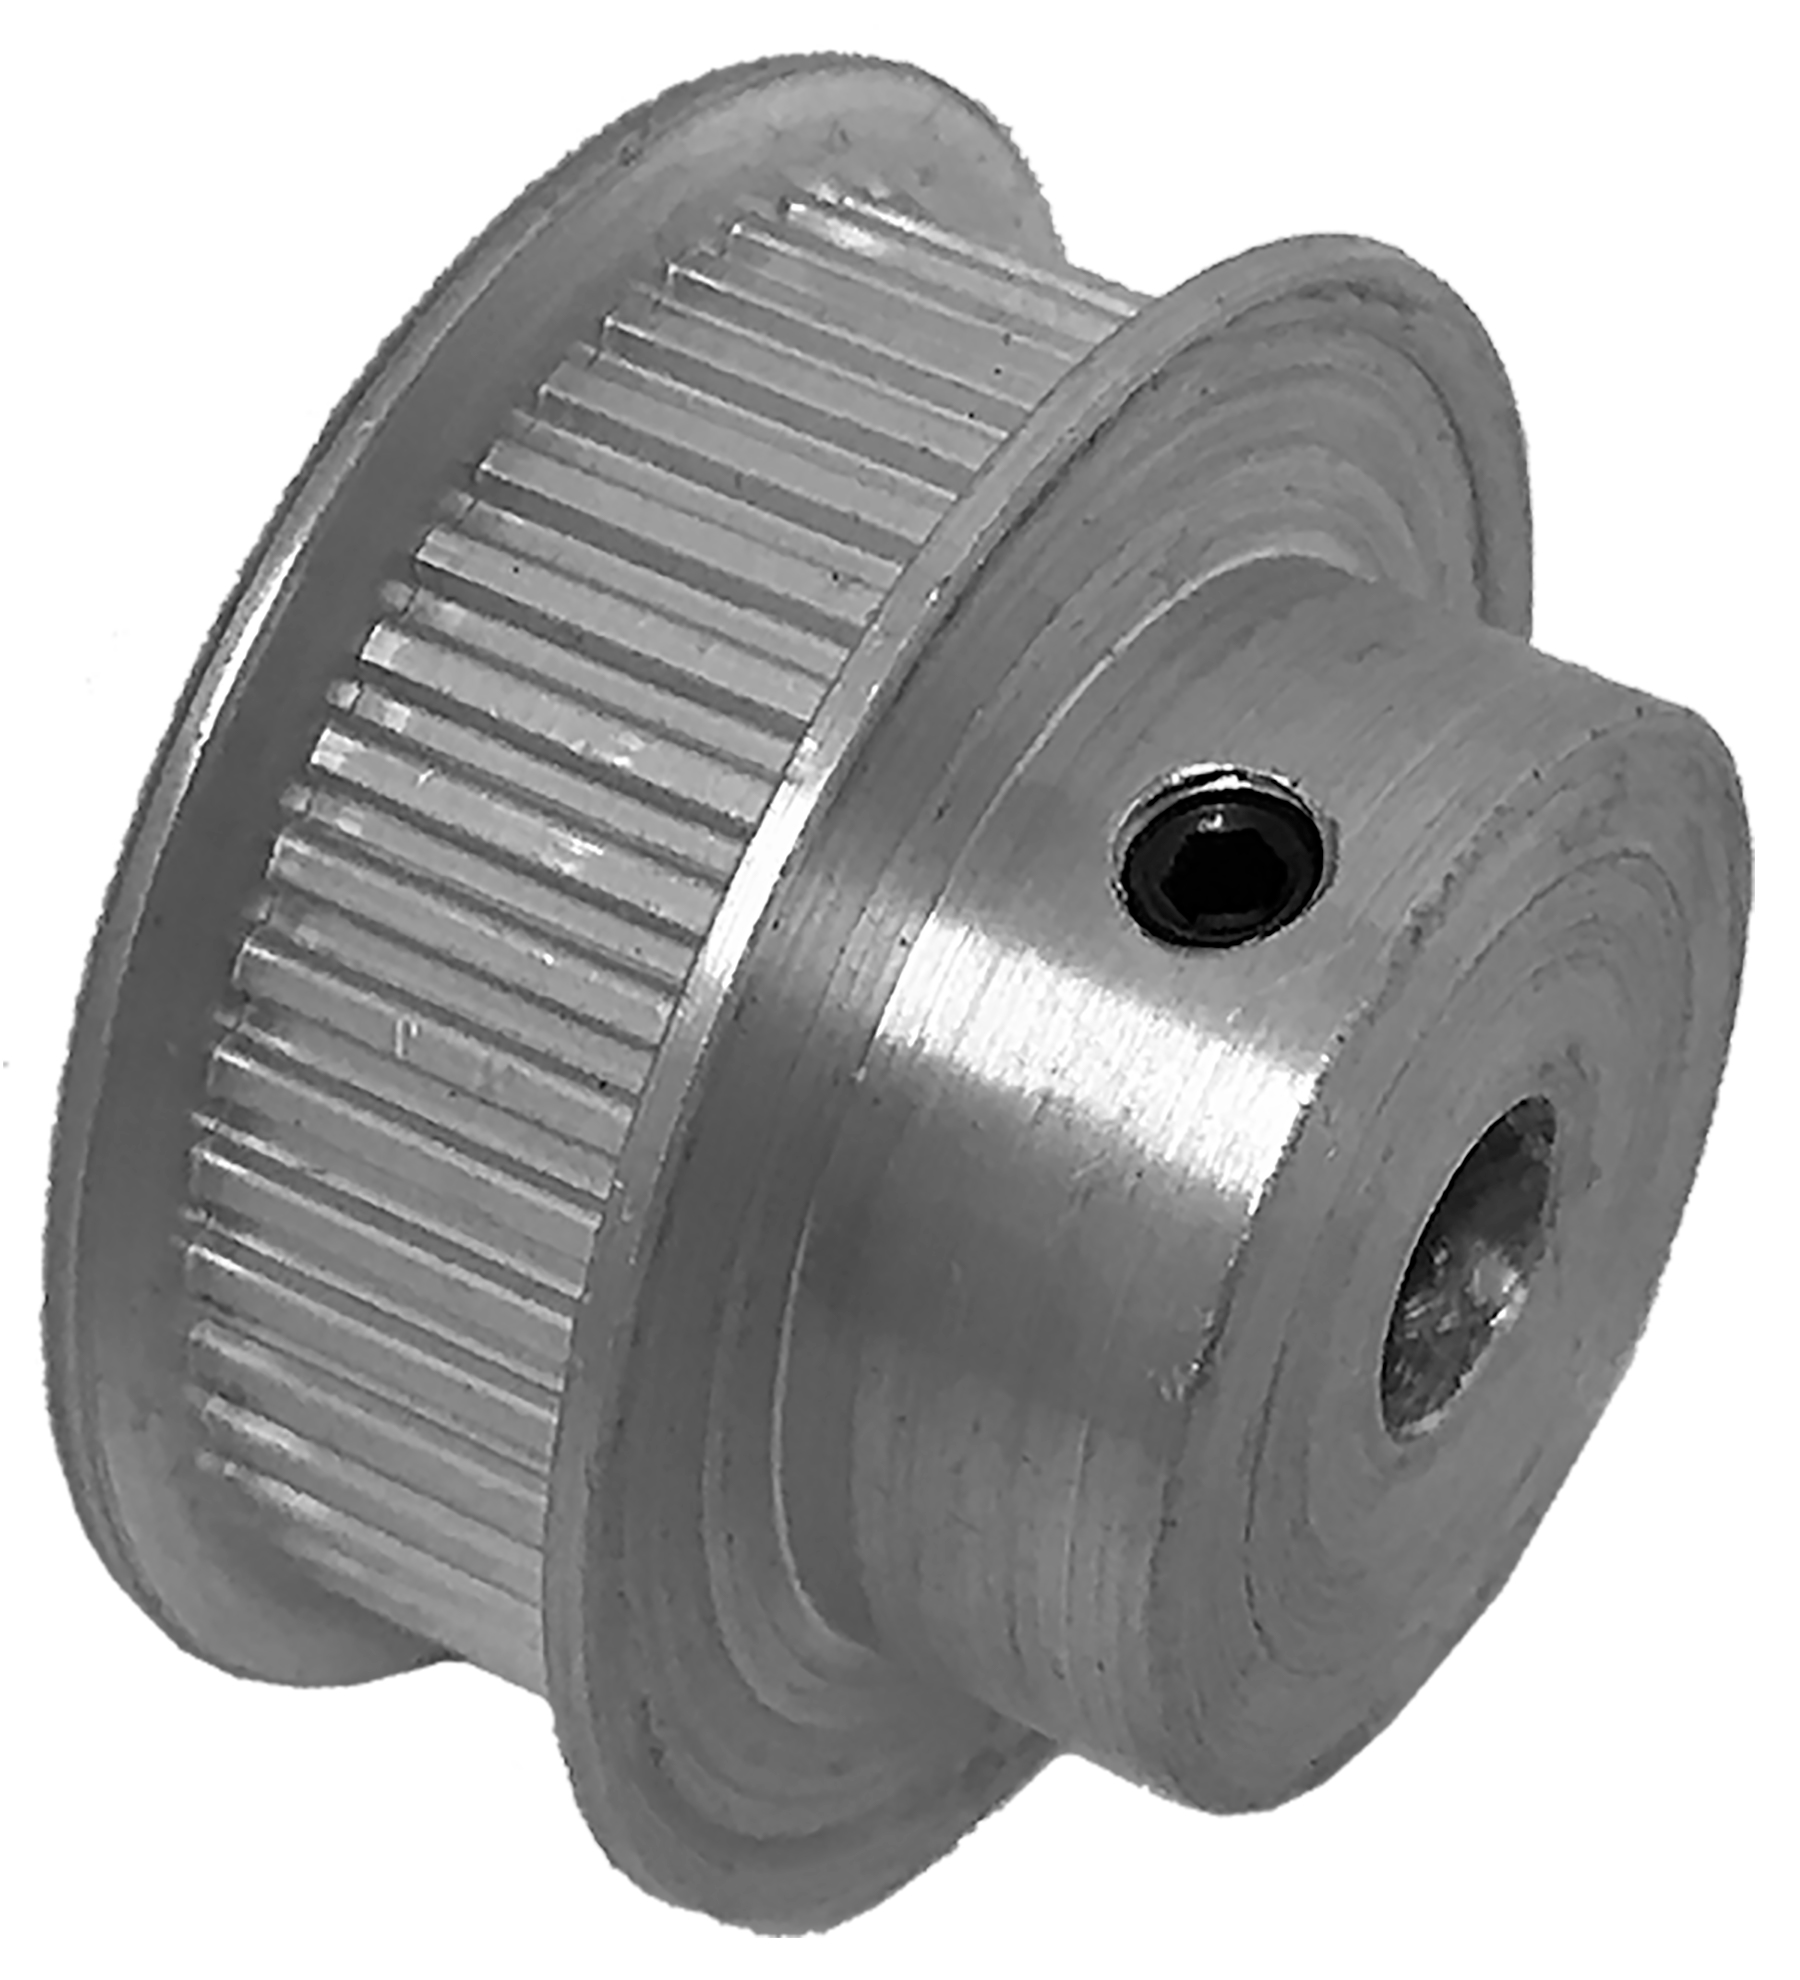 44LT312-6FA3 - Aluminum Imperial Pitch Pulleys